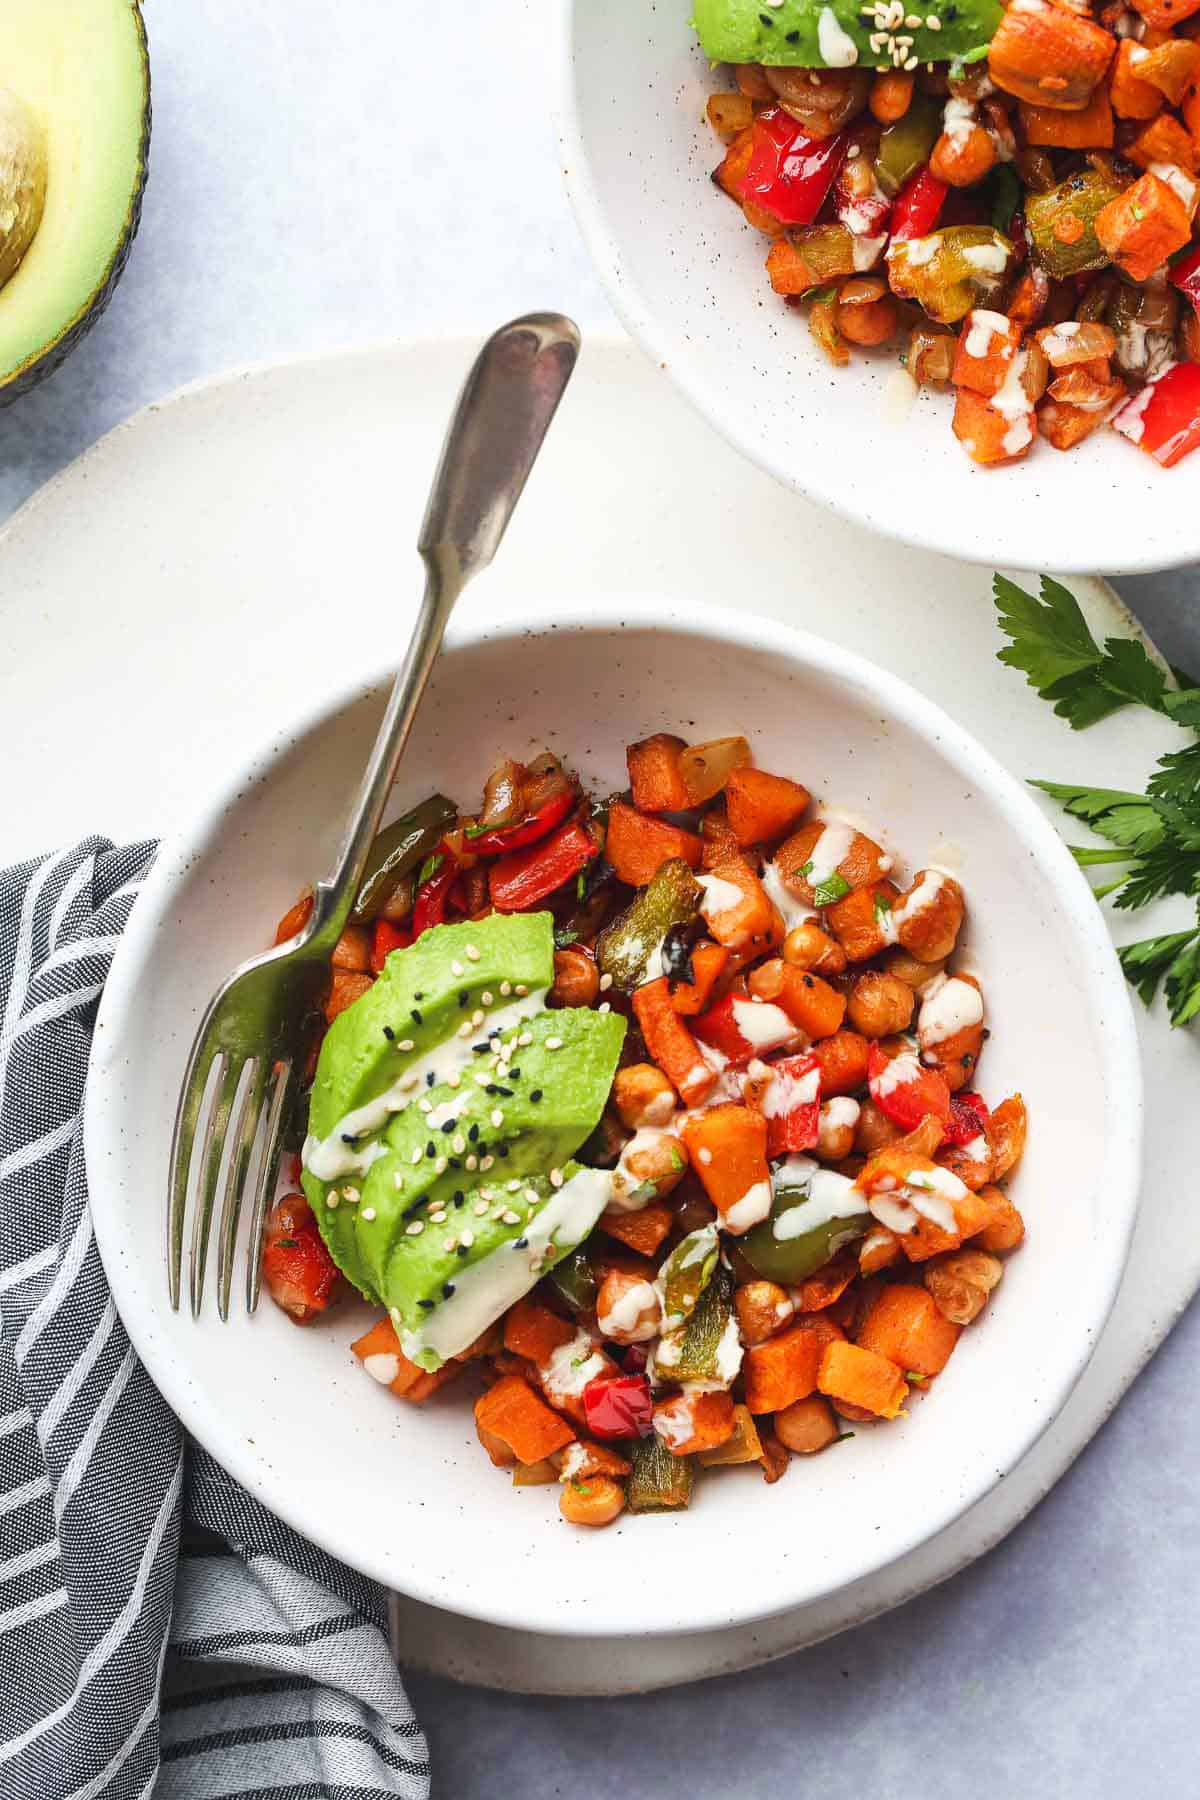 A white bowl eith sweet potato hash, fresh avocado slices, and tahini dressing drizzle. With a fork on the side, and a kitchen tea towel in the background.